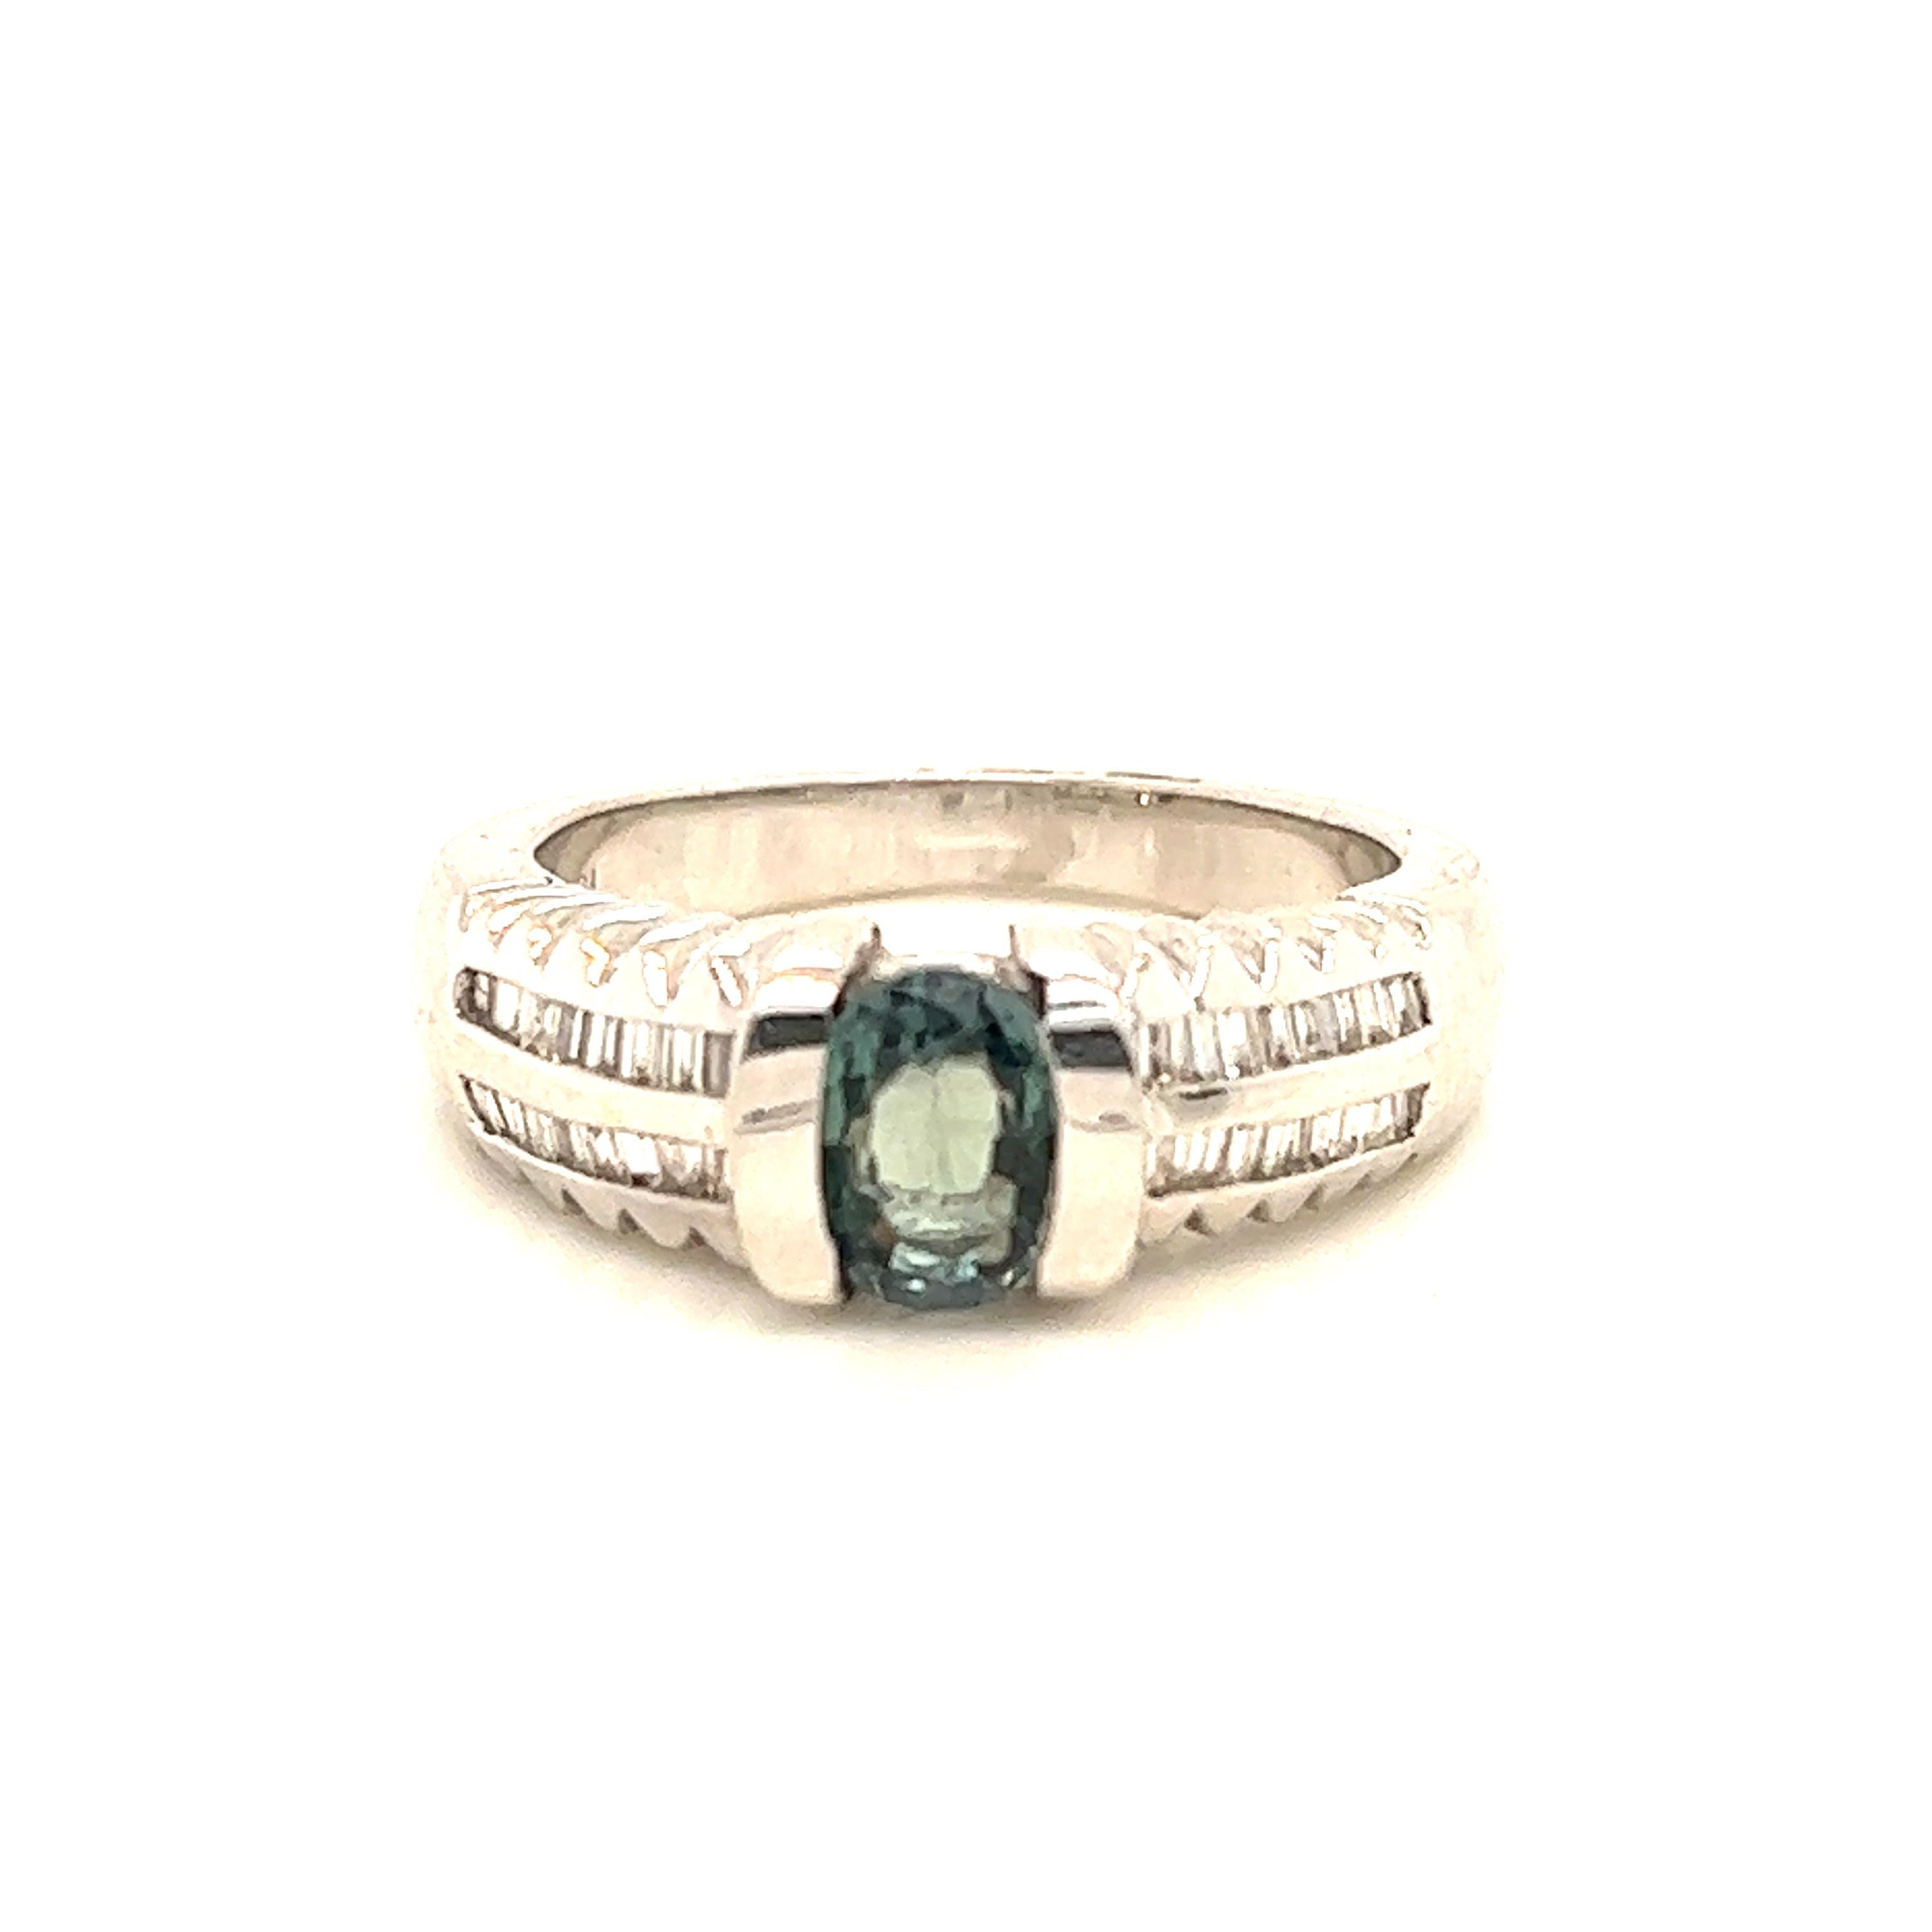 This is a gorgeous natural AAA quality oval Alexandrite surrounded by dainty diamonds that are set in a vintage white gold setting. This ring features a natural 1.13 carat oval alexandrite that is certified by the Gemological Institute of America